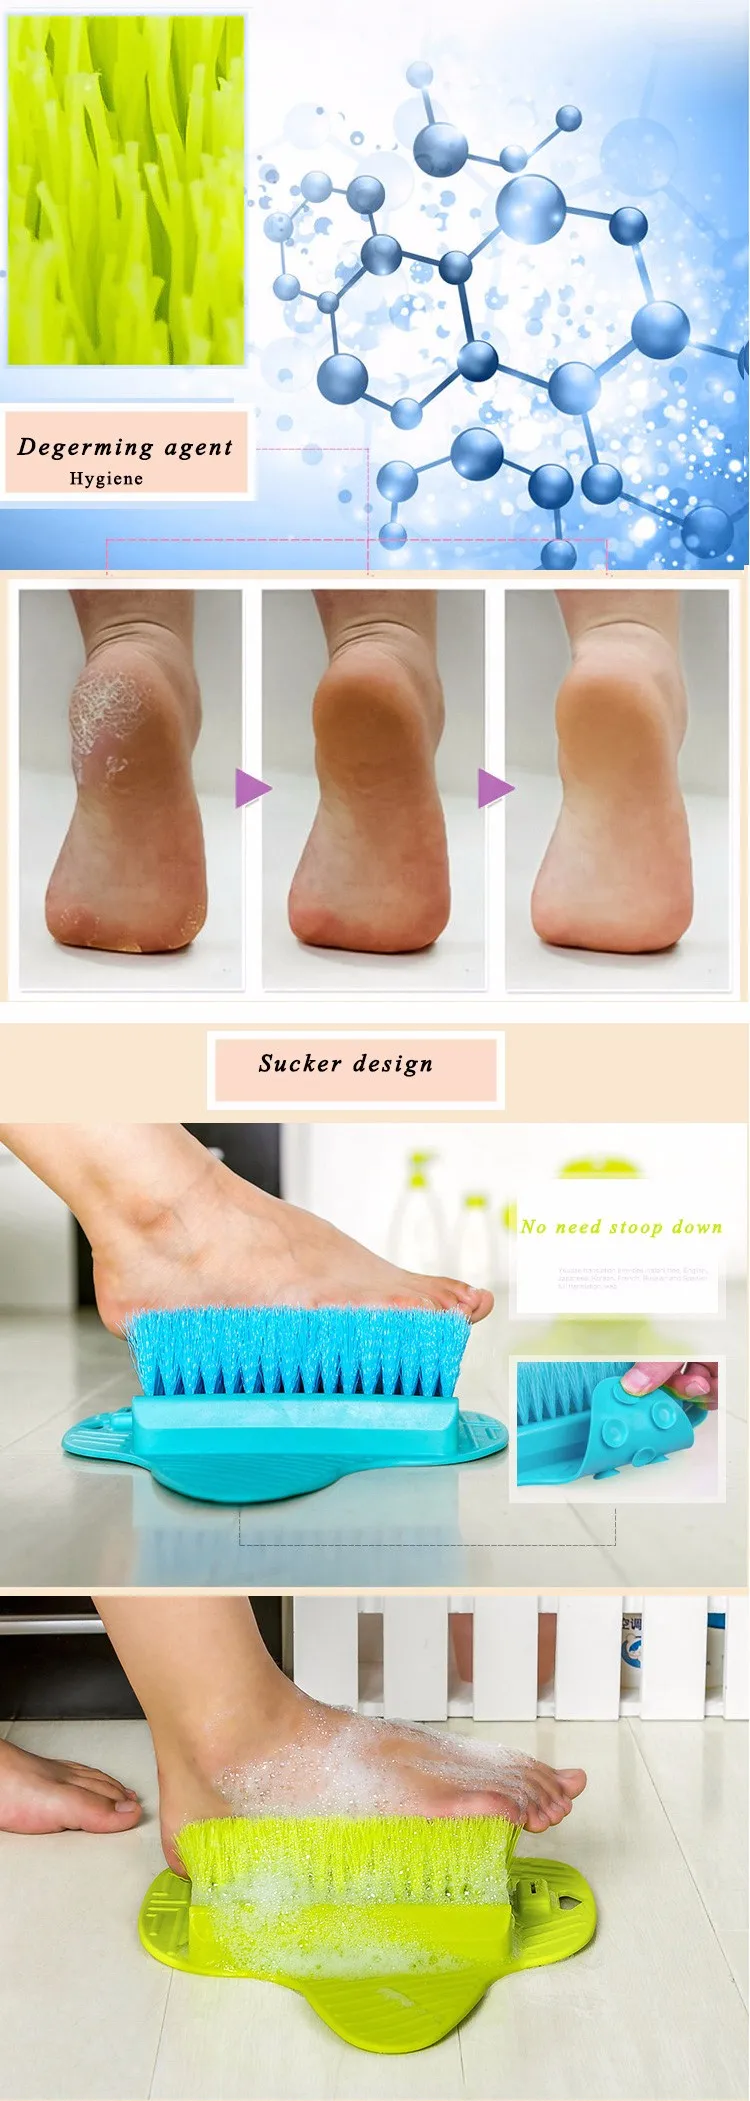 Finesource Foot Care Clean Brush and Massager Silicone Shower Cleaning Bath Scrubber Washing Foot Tool Exfoliating Foot Cleaner